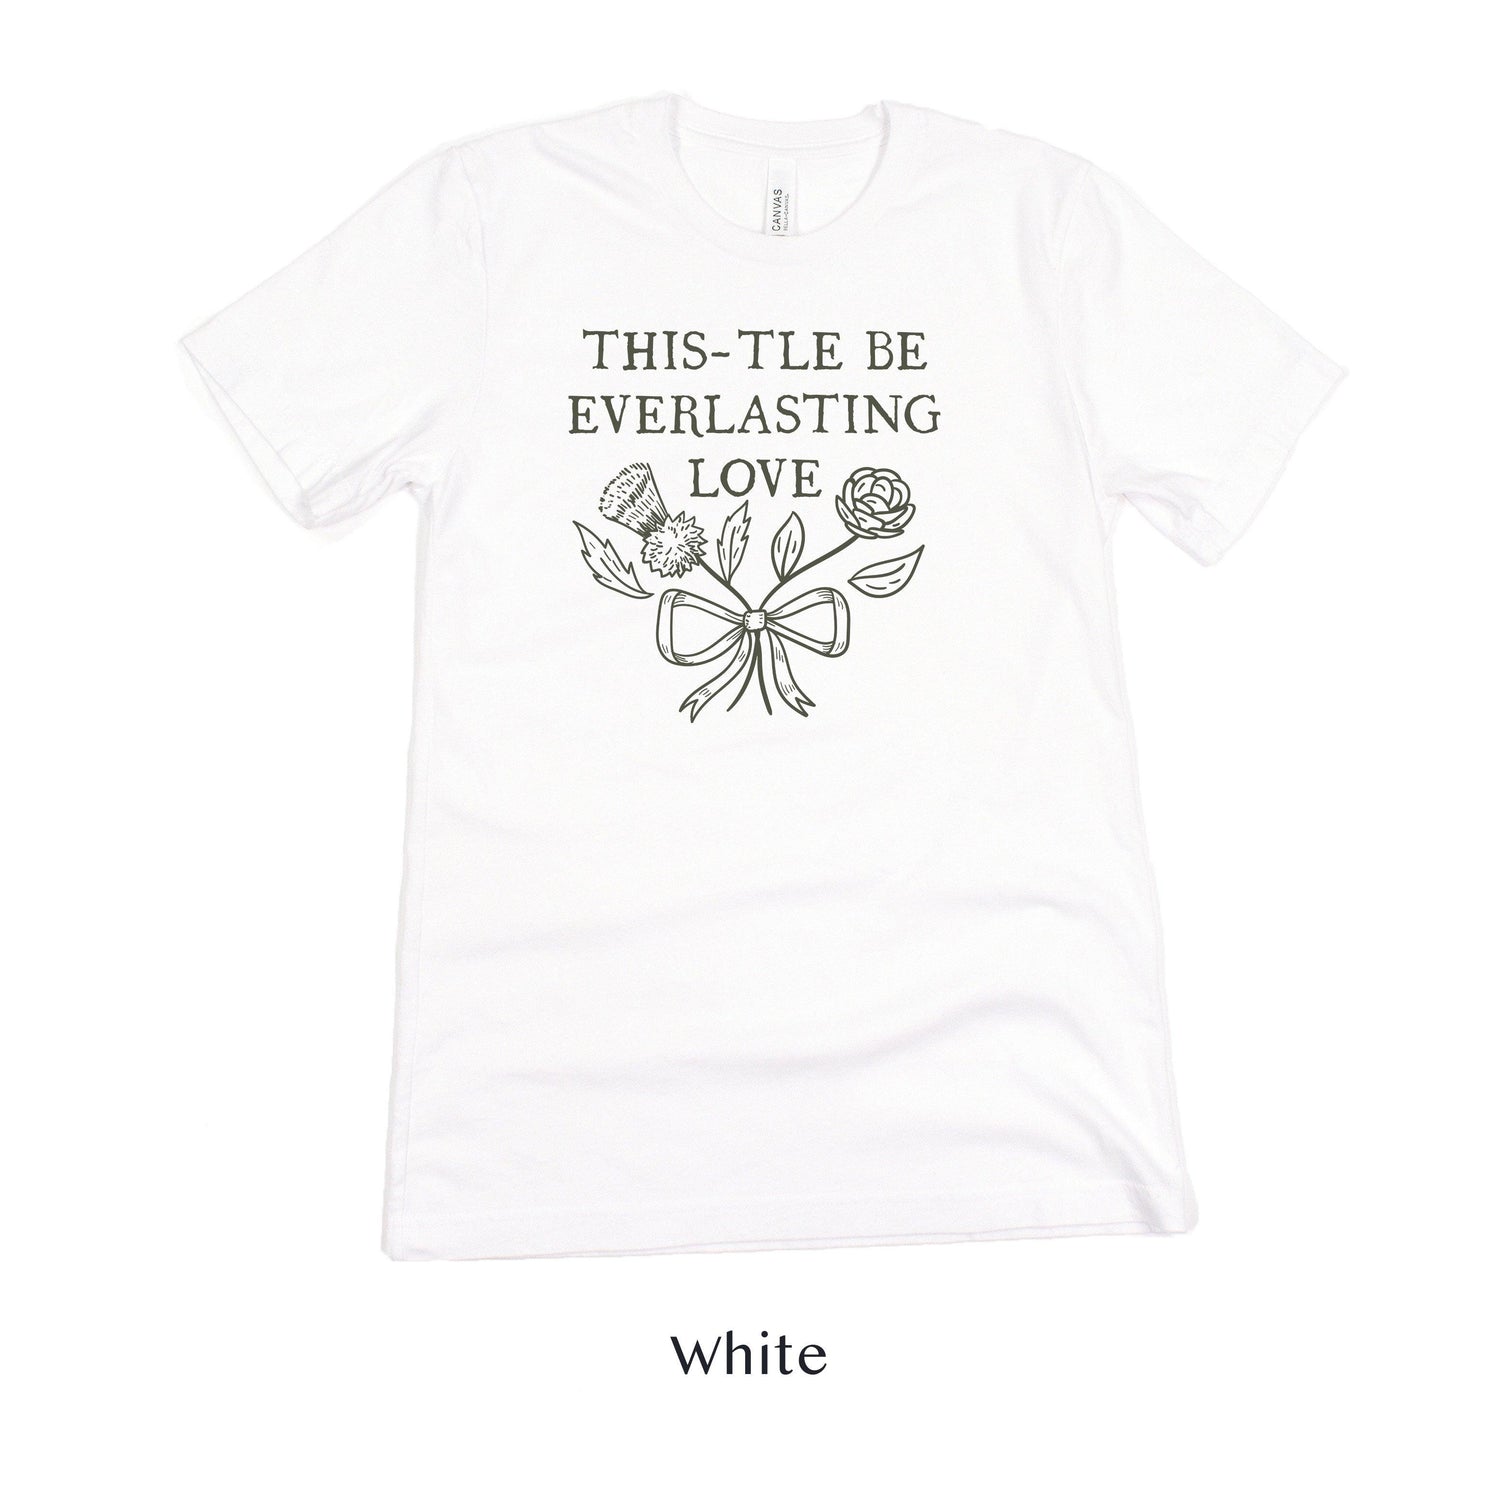 This-tle Be Everlasting Love - Engagement Short-Sleeve Tee - Plus Sizes Available by Oaklynn Lane